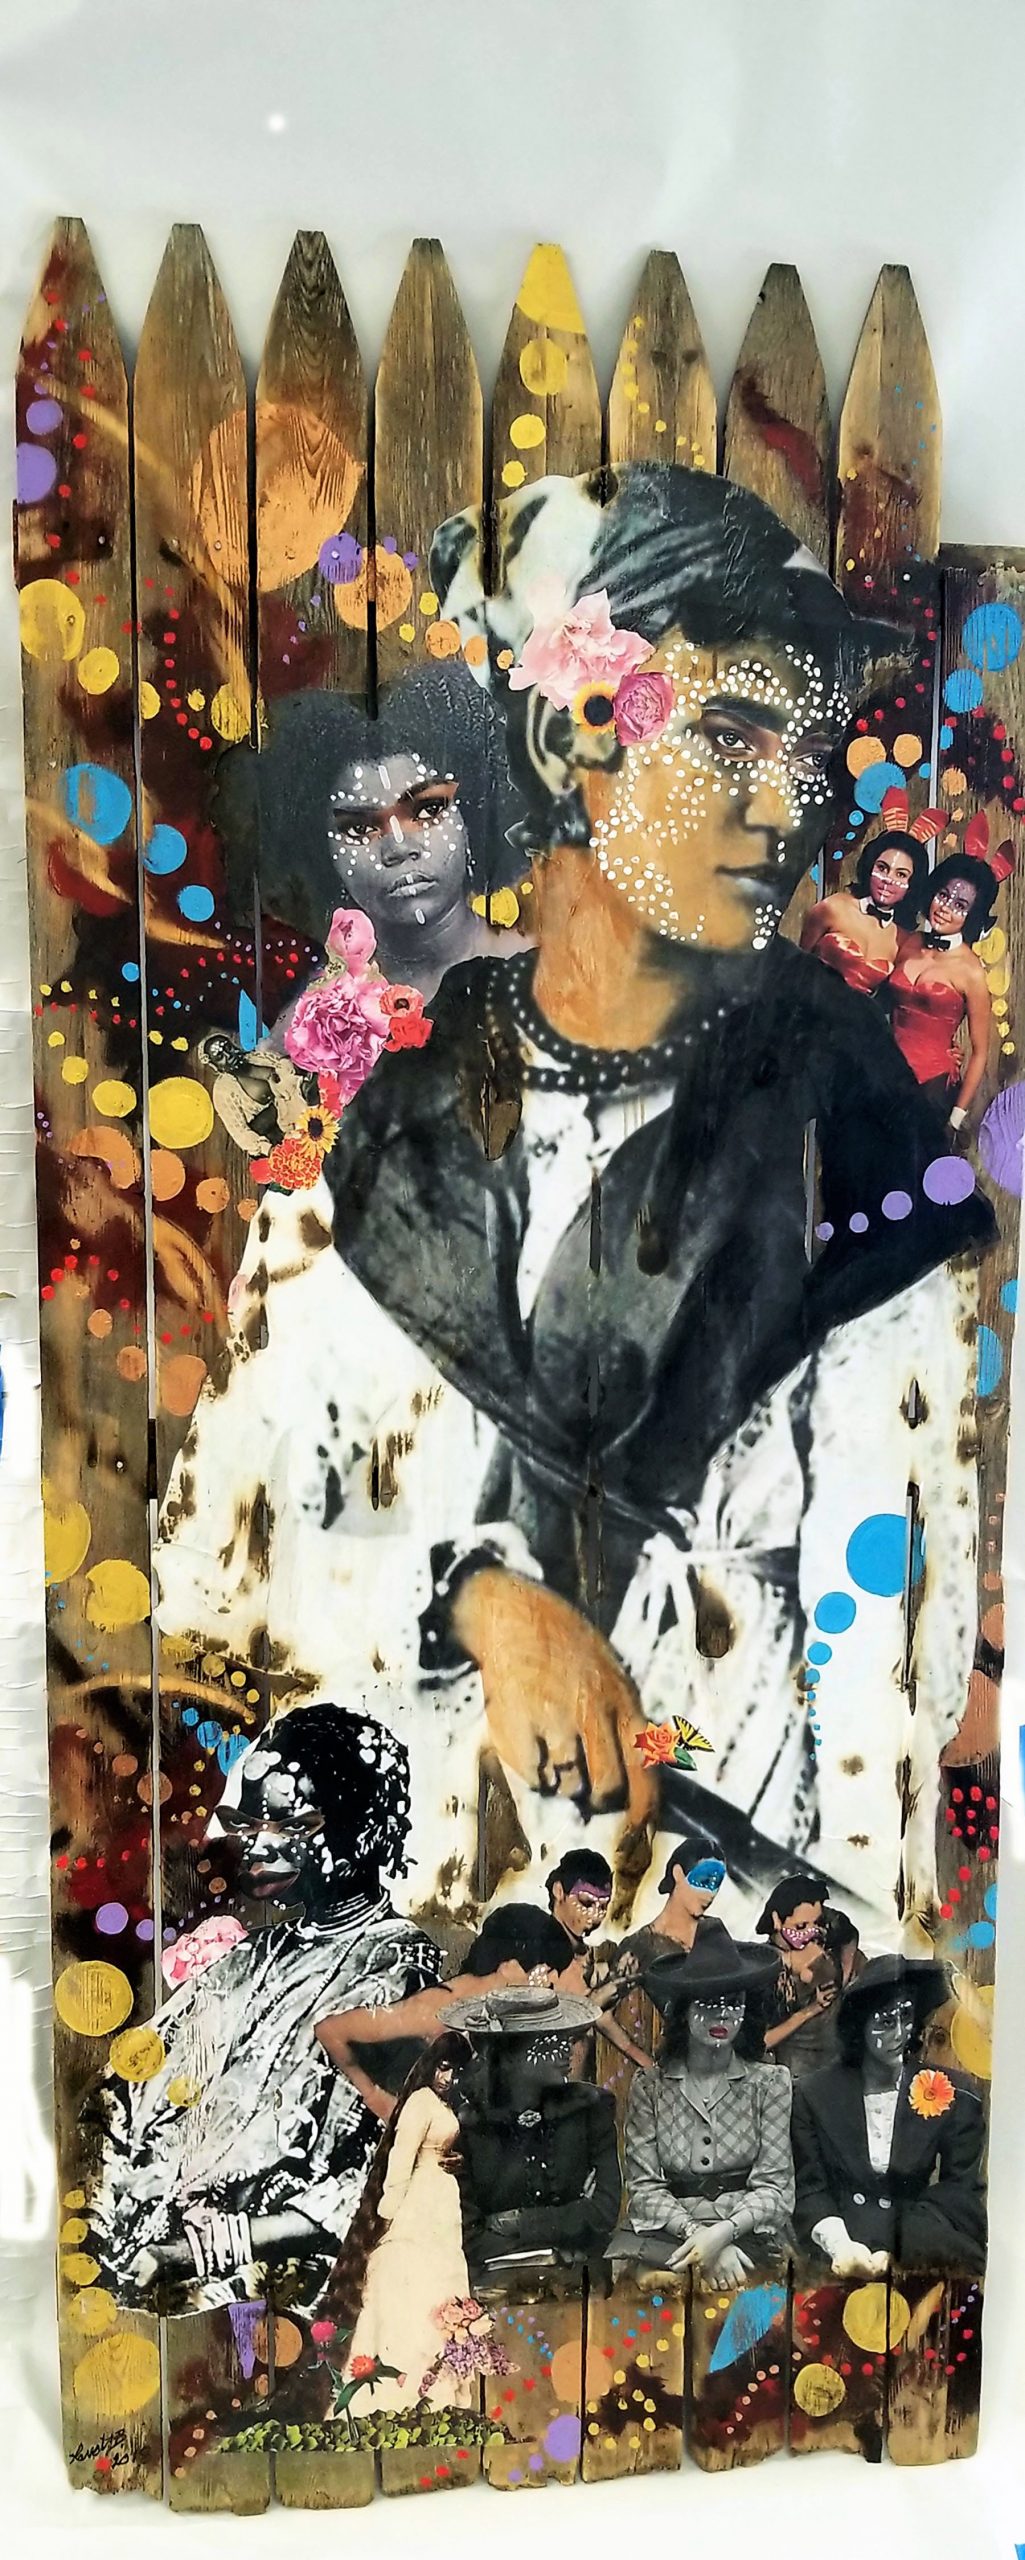 Mixed media of Black women throughout history.